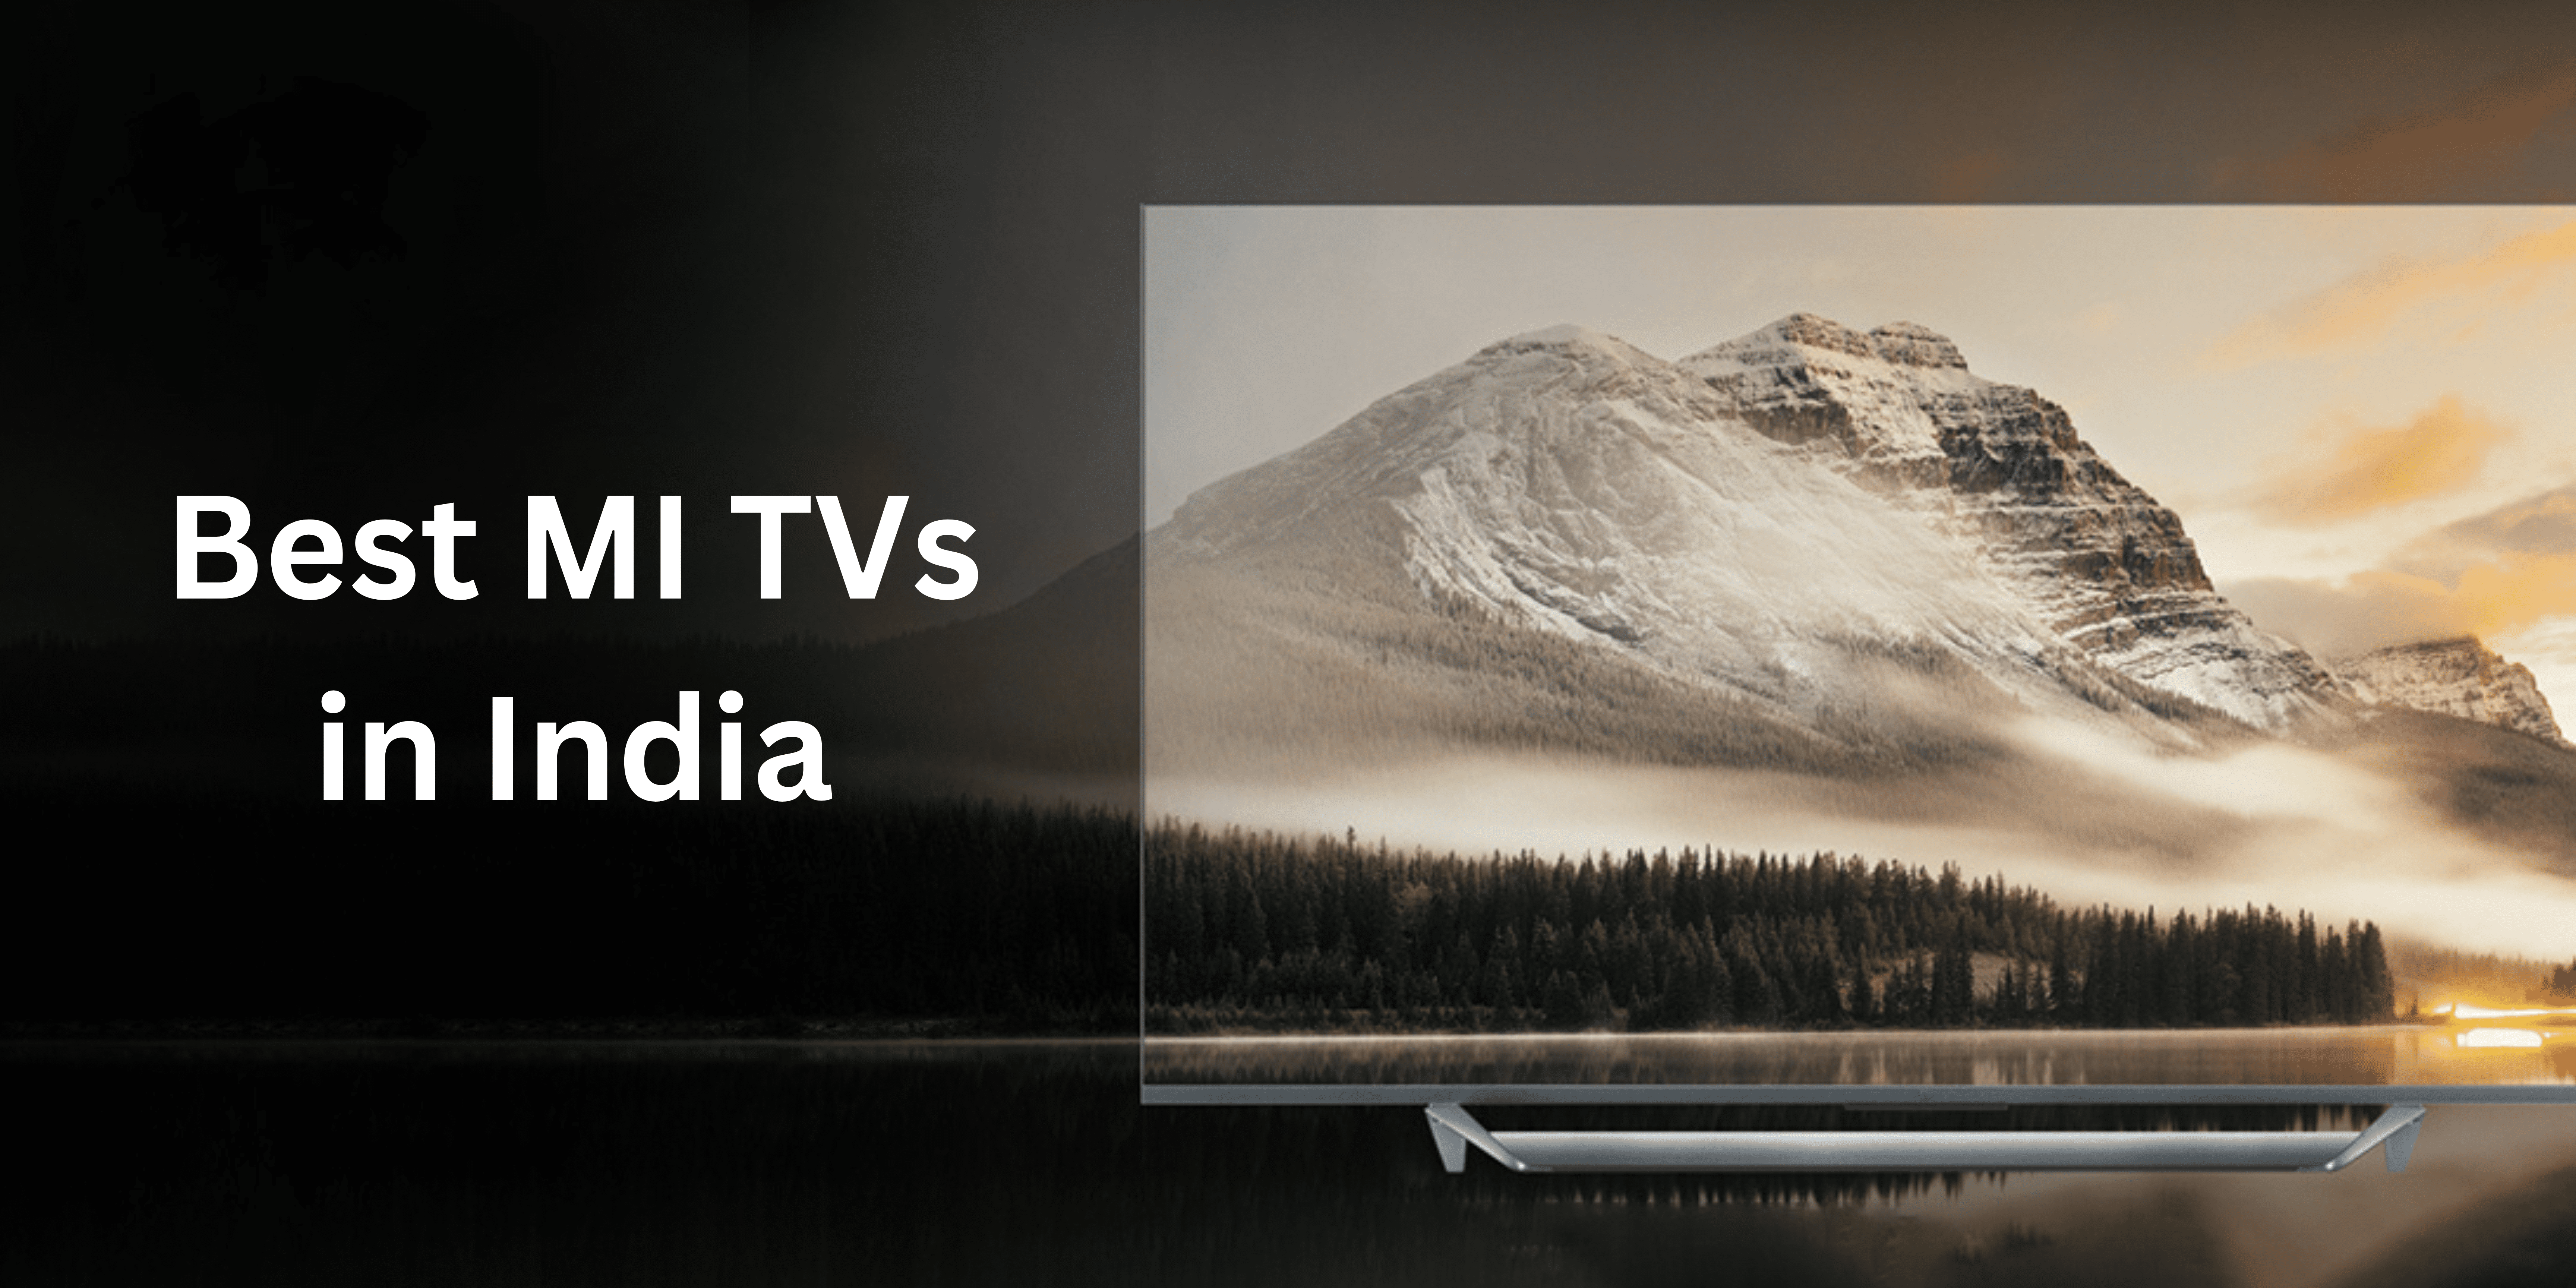 Best MI TVs in India - A Review across screen sizes and price points